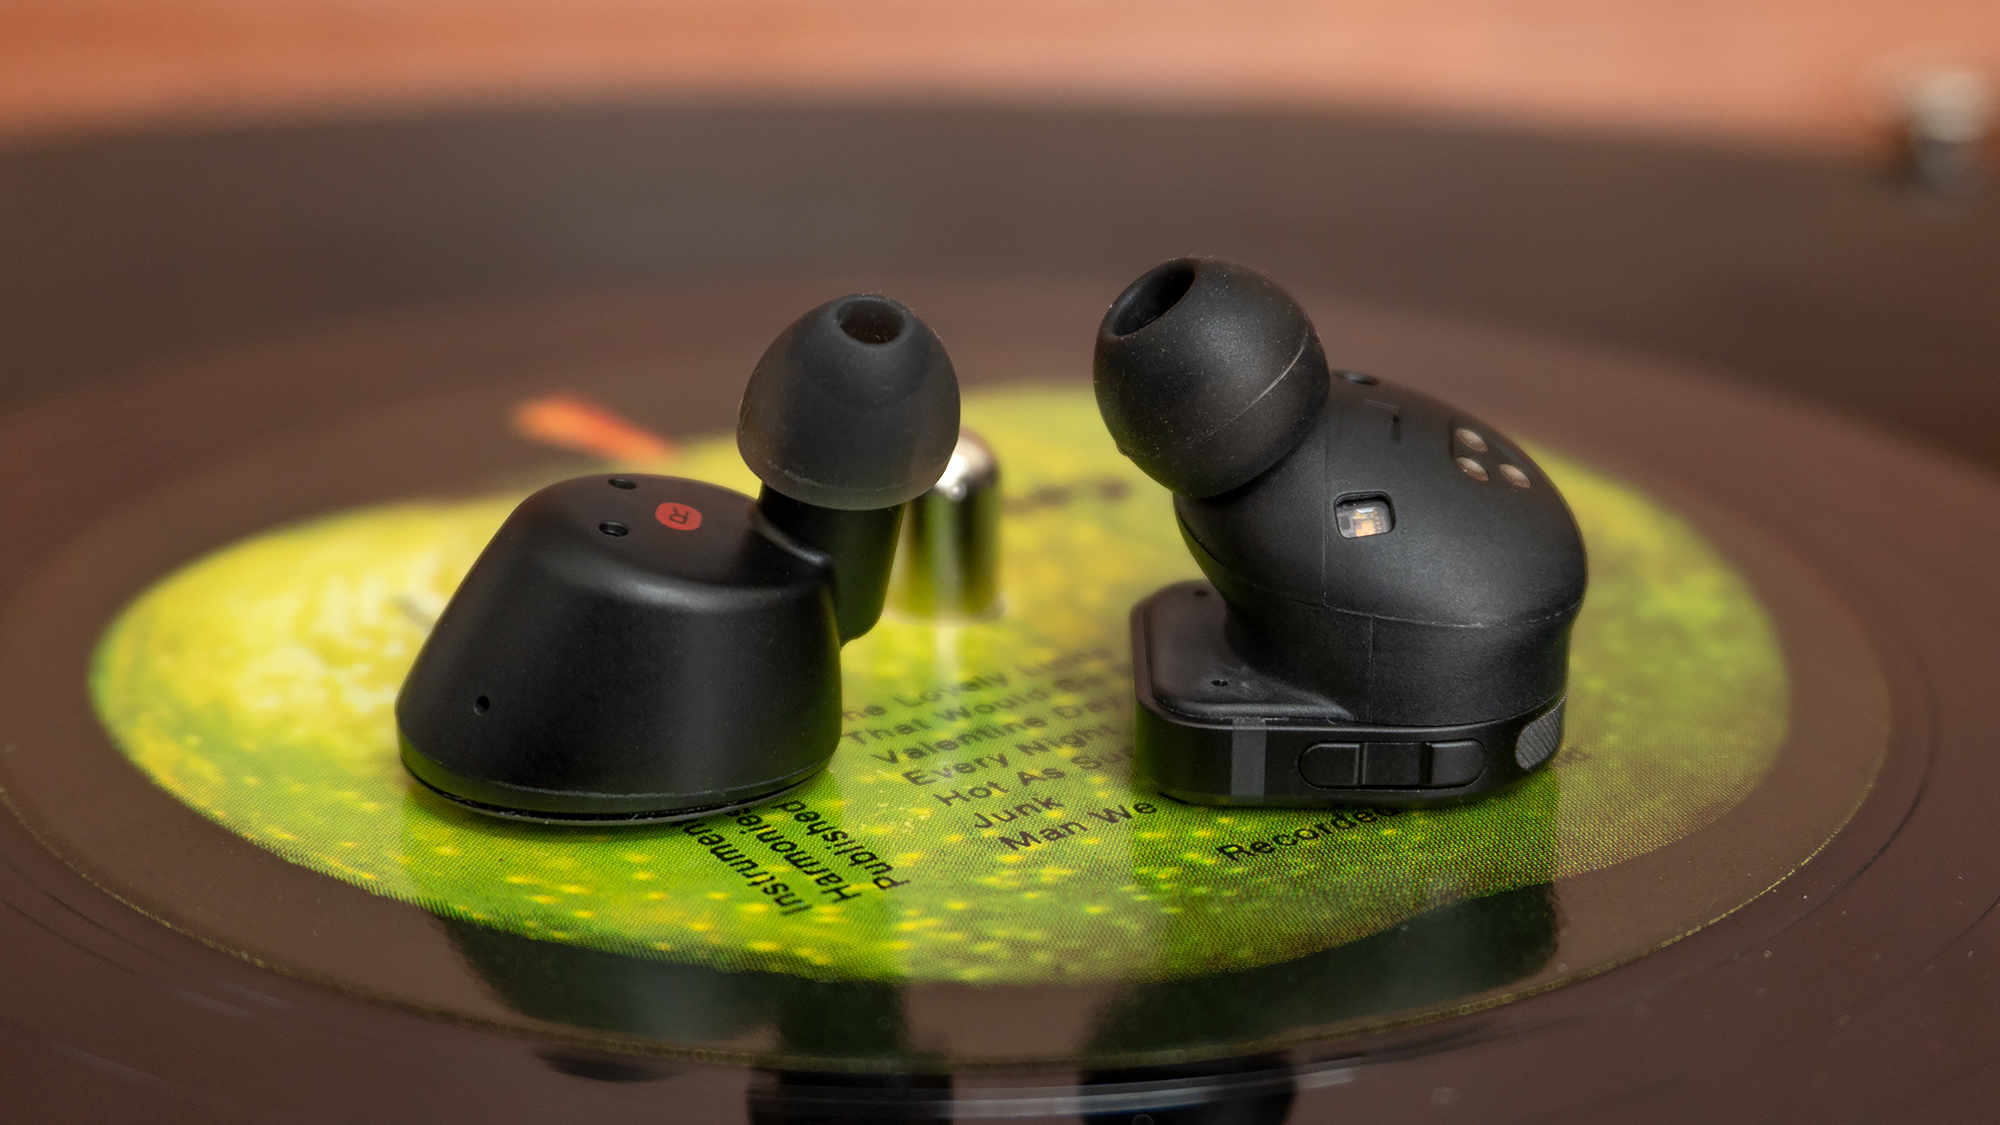 The sound quality of the Klipsch  T5 II True Wireless earbuds (left) comes close to the Master & Dynamic MW08s (right), but Klipsch's design doesn't stay in the ear as well as M&D's. (Photo: Andrew Liszewski/Gizmodo)